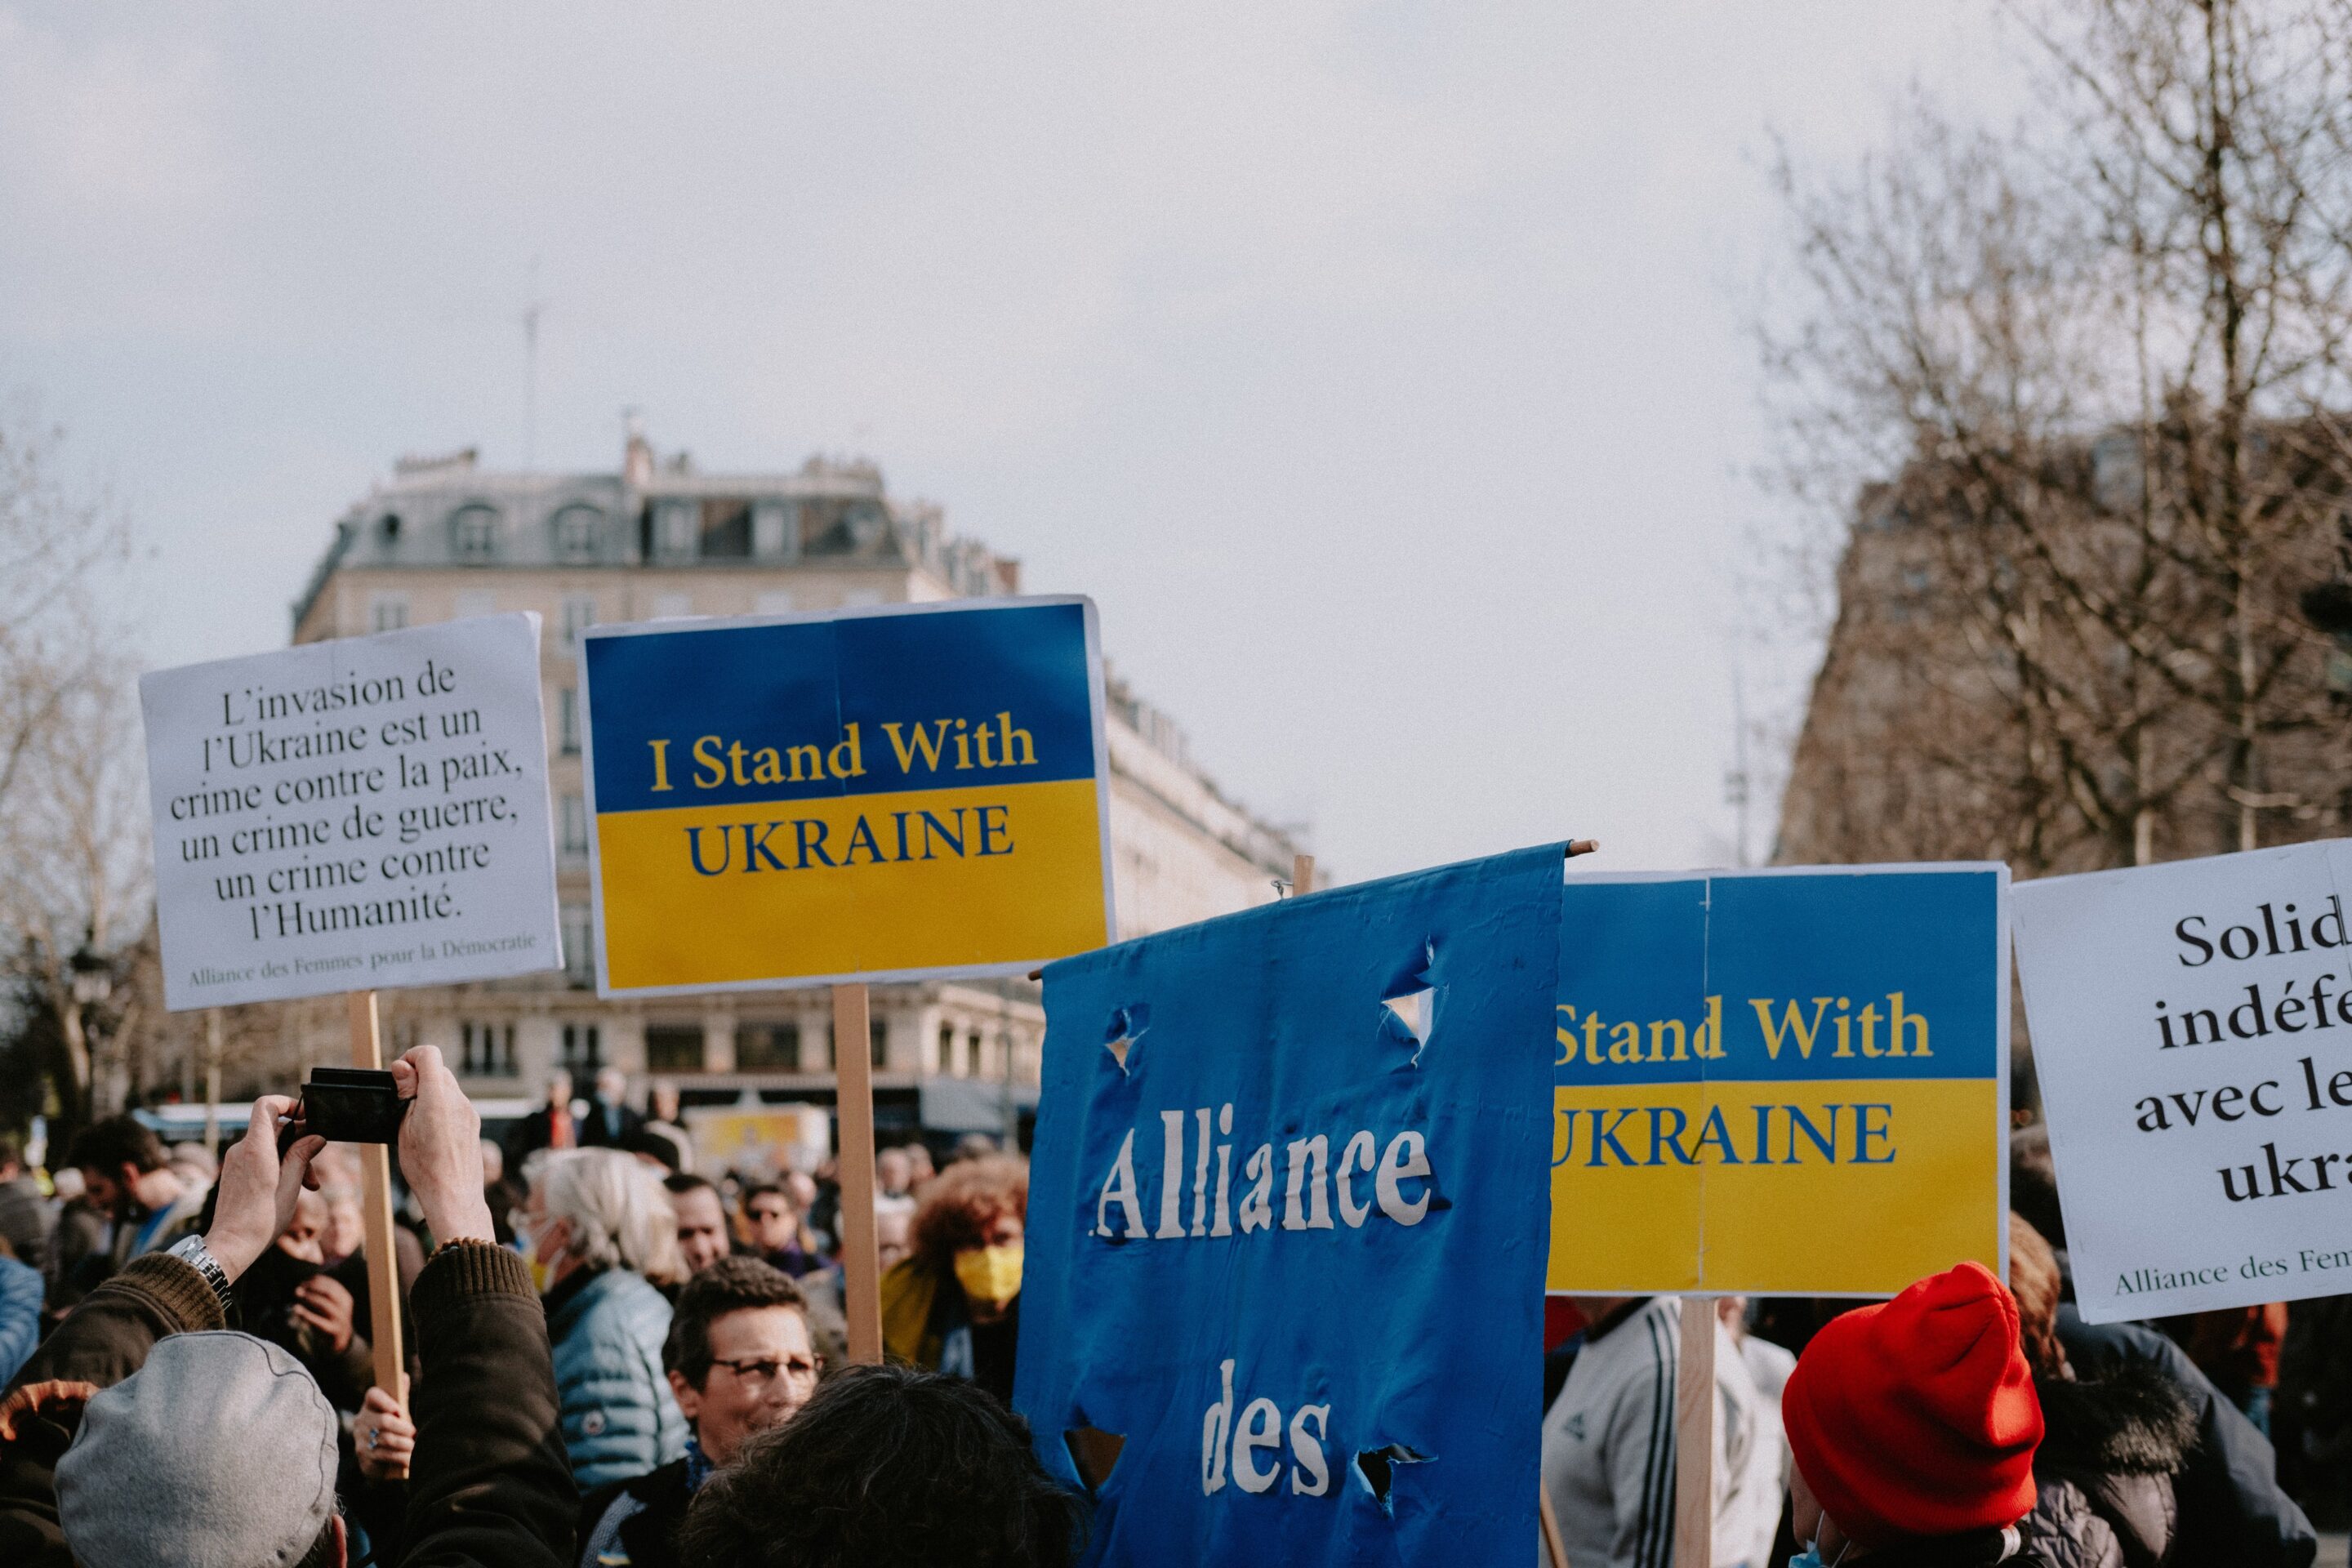 People on Protest Against War in Ukraine